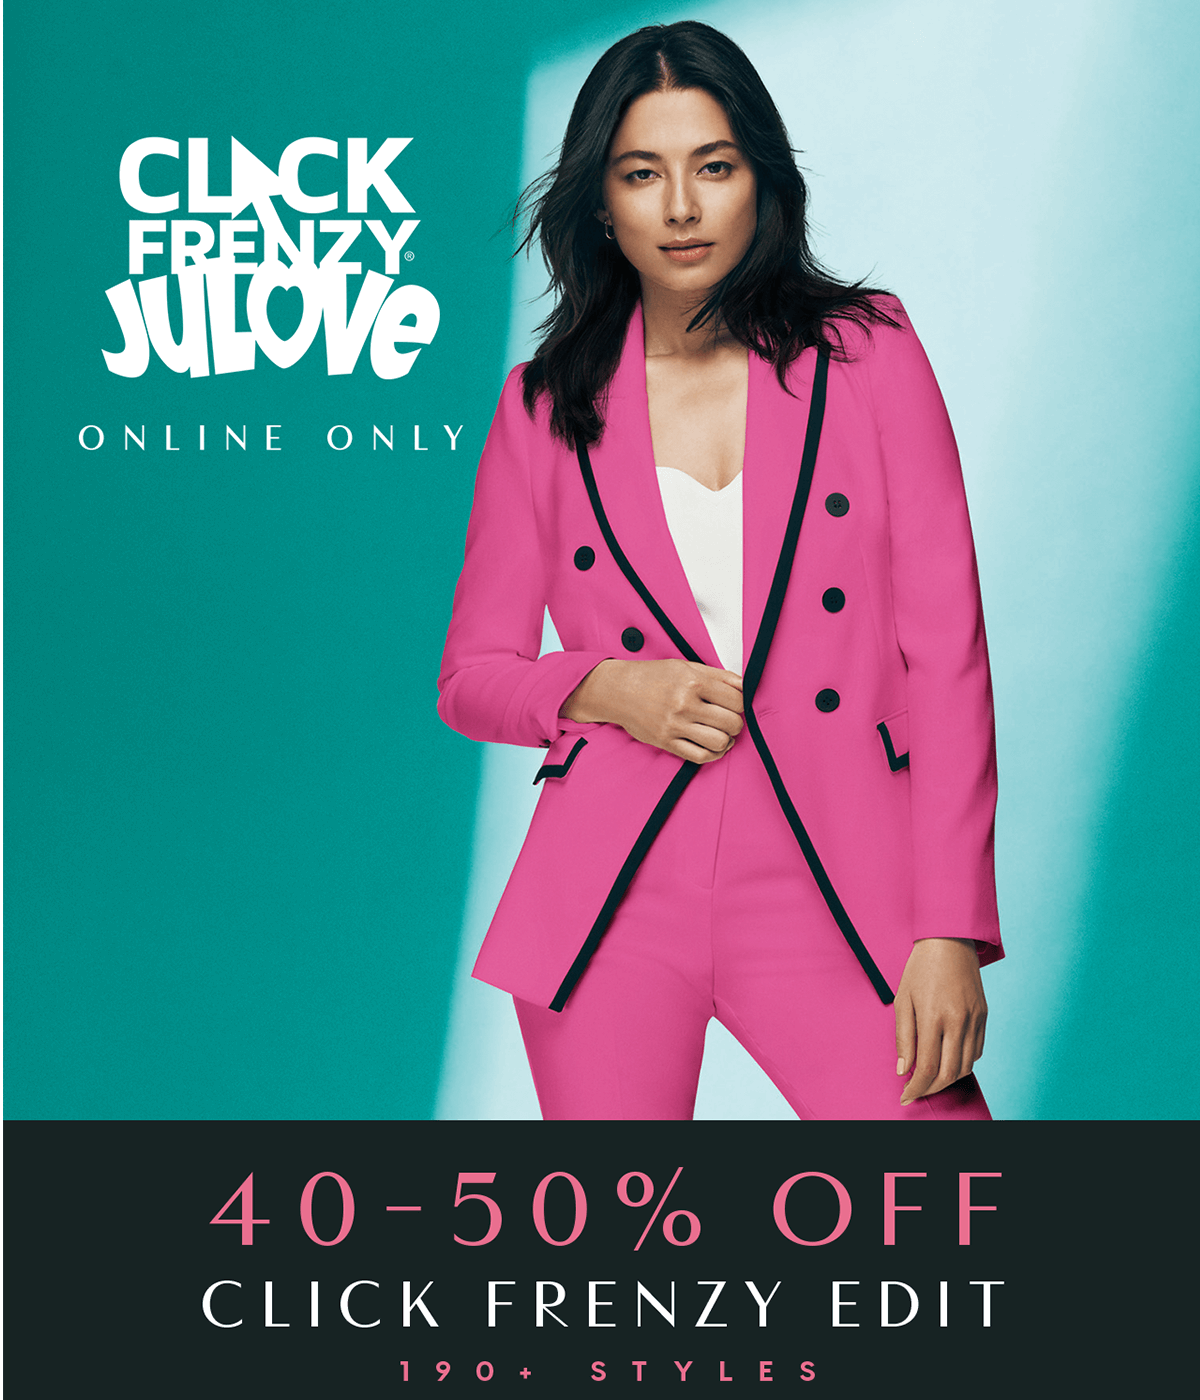 Online Only. Ends Tonight. Click Frenzy JuLove. 40 - 50% Off Click Frenzy Edit. 190+ Styles.